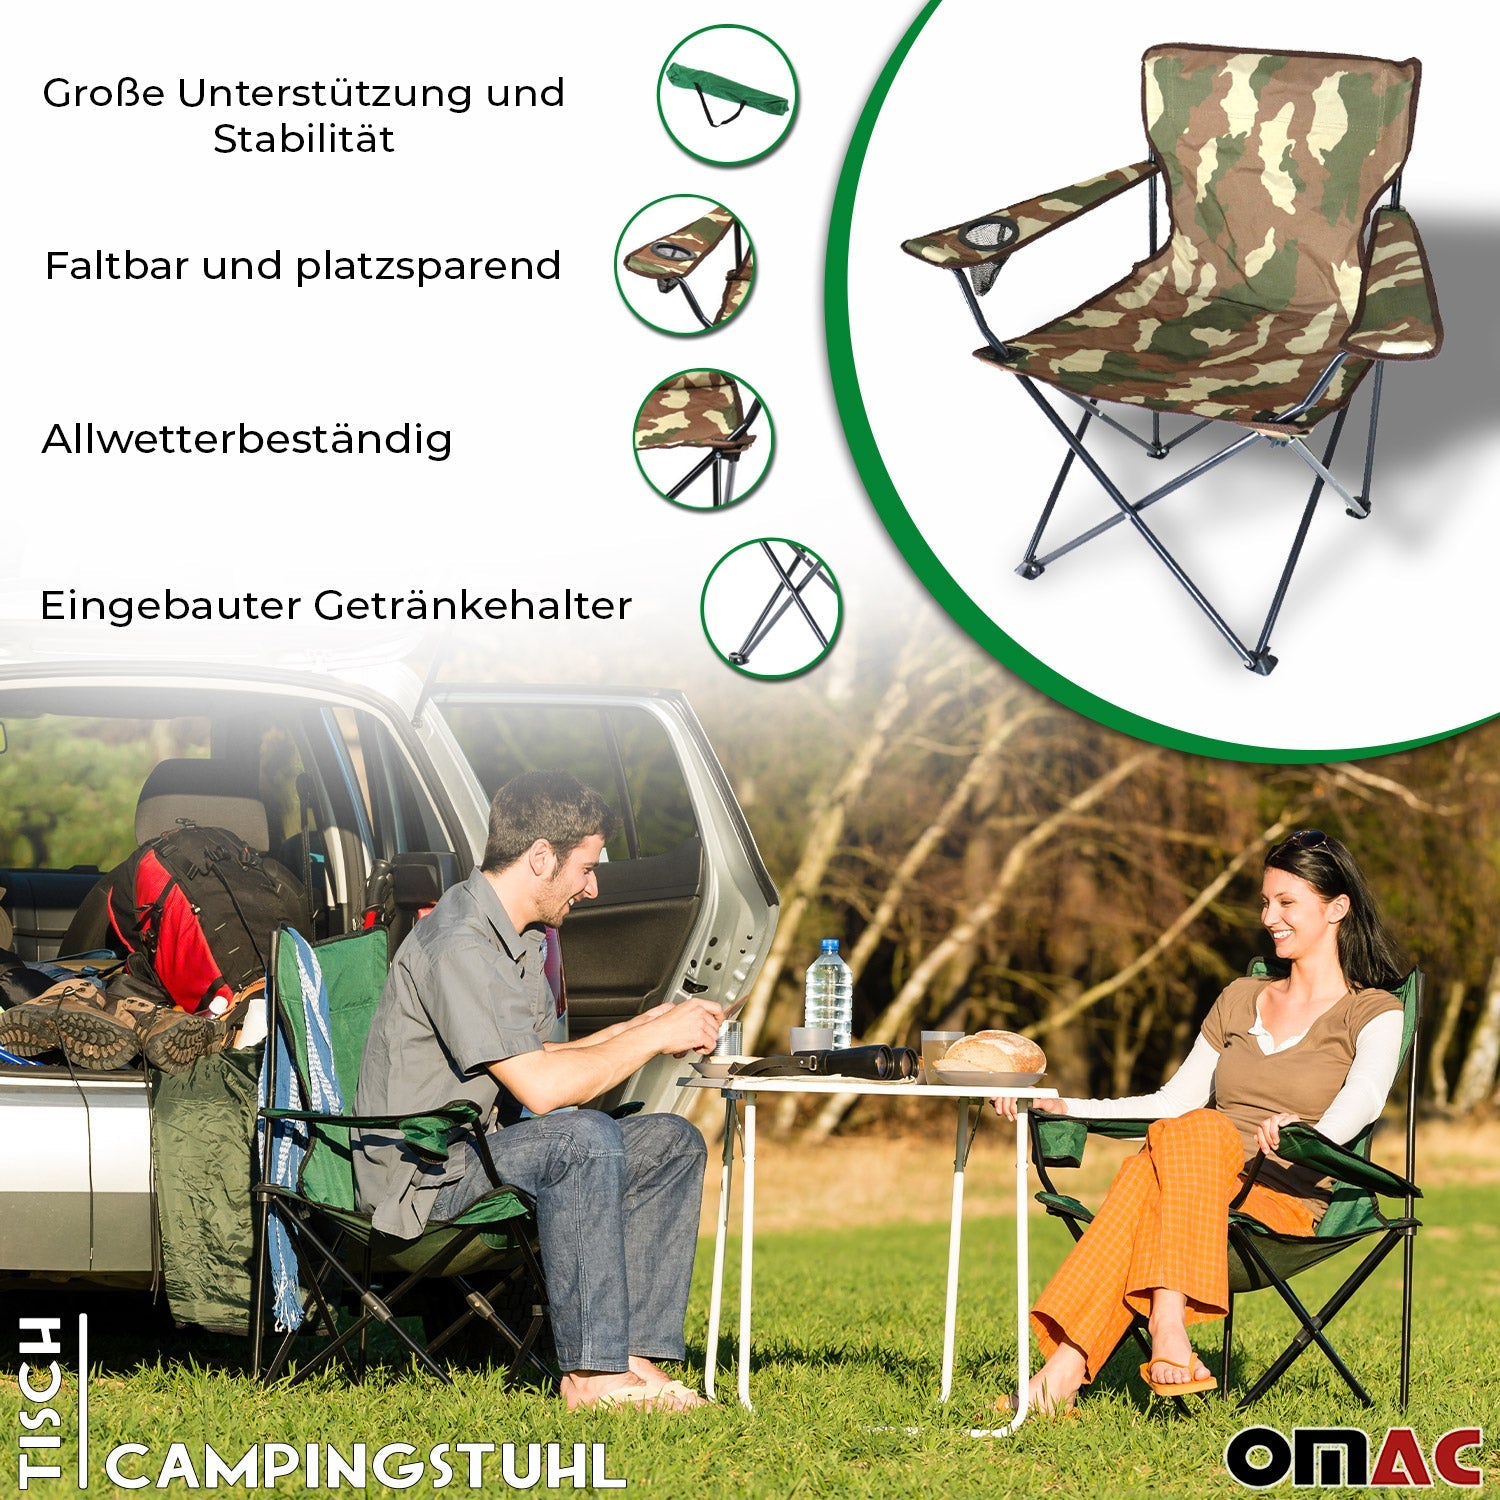 Camping chair folding chair garden chair fishing chair picnic BBQ camouflage patterned - Omac Shop GmbH